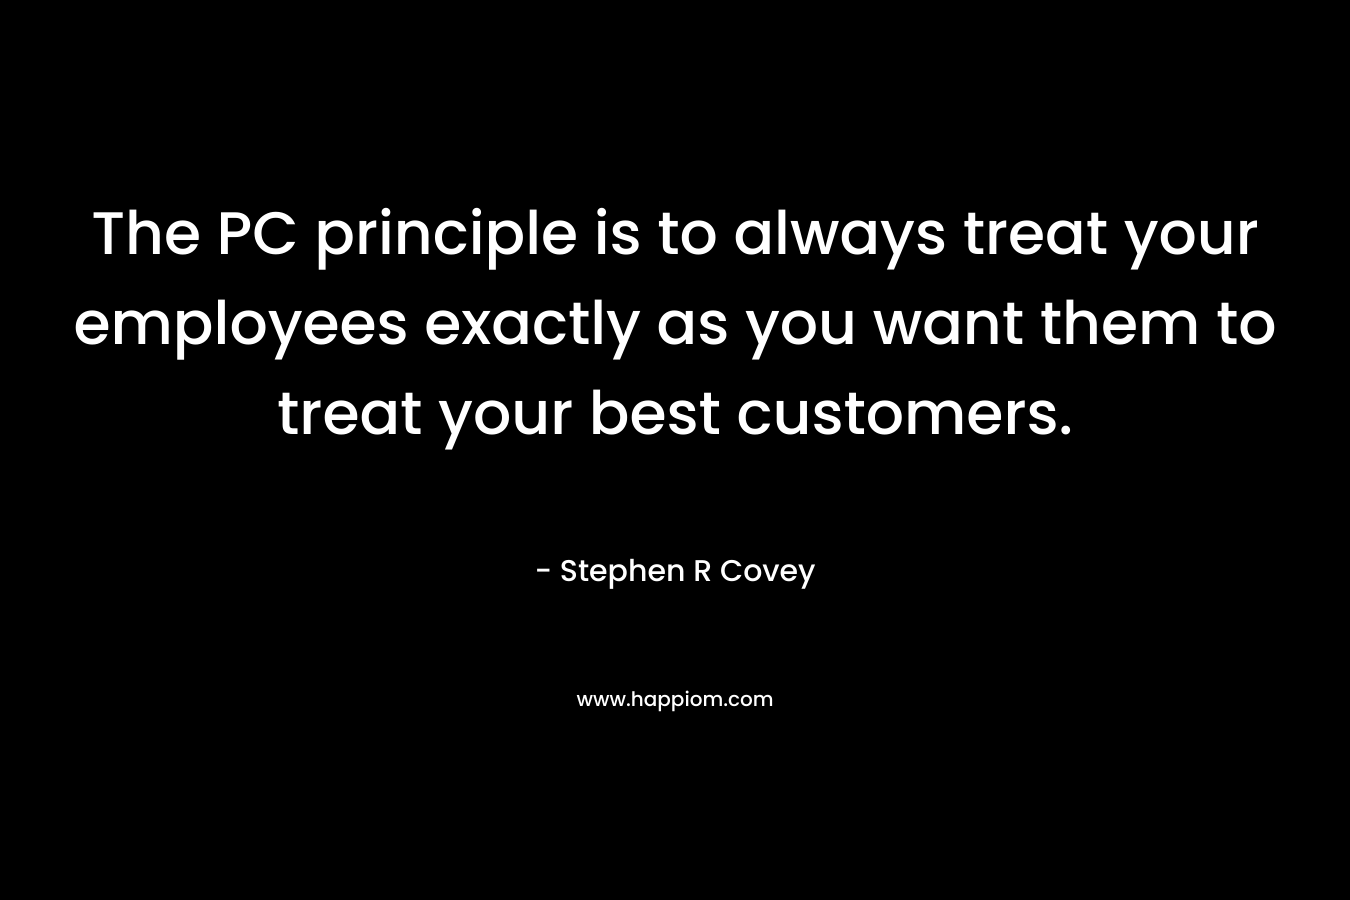 The PC principle is to always treat your employees exactly as you want them to treat your best customers.